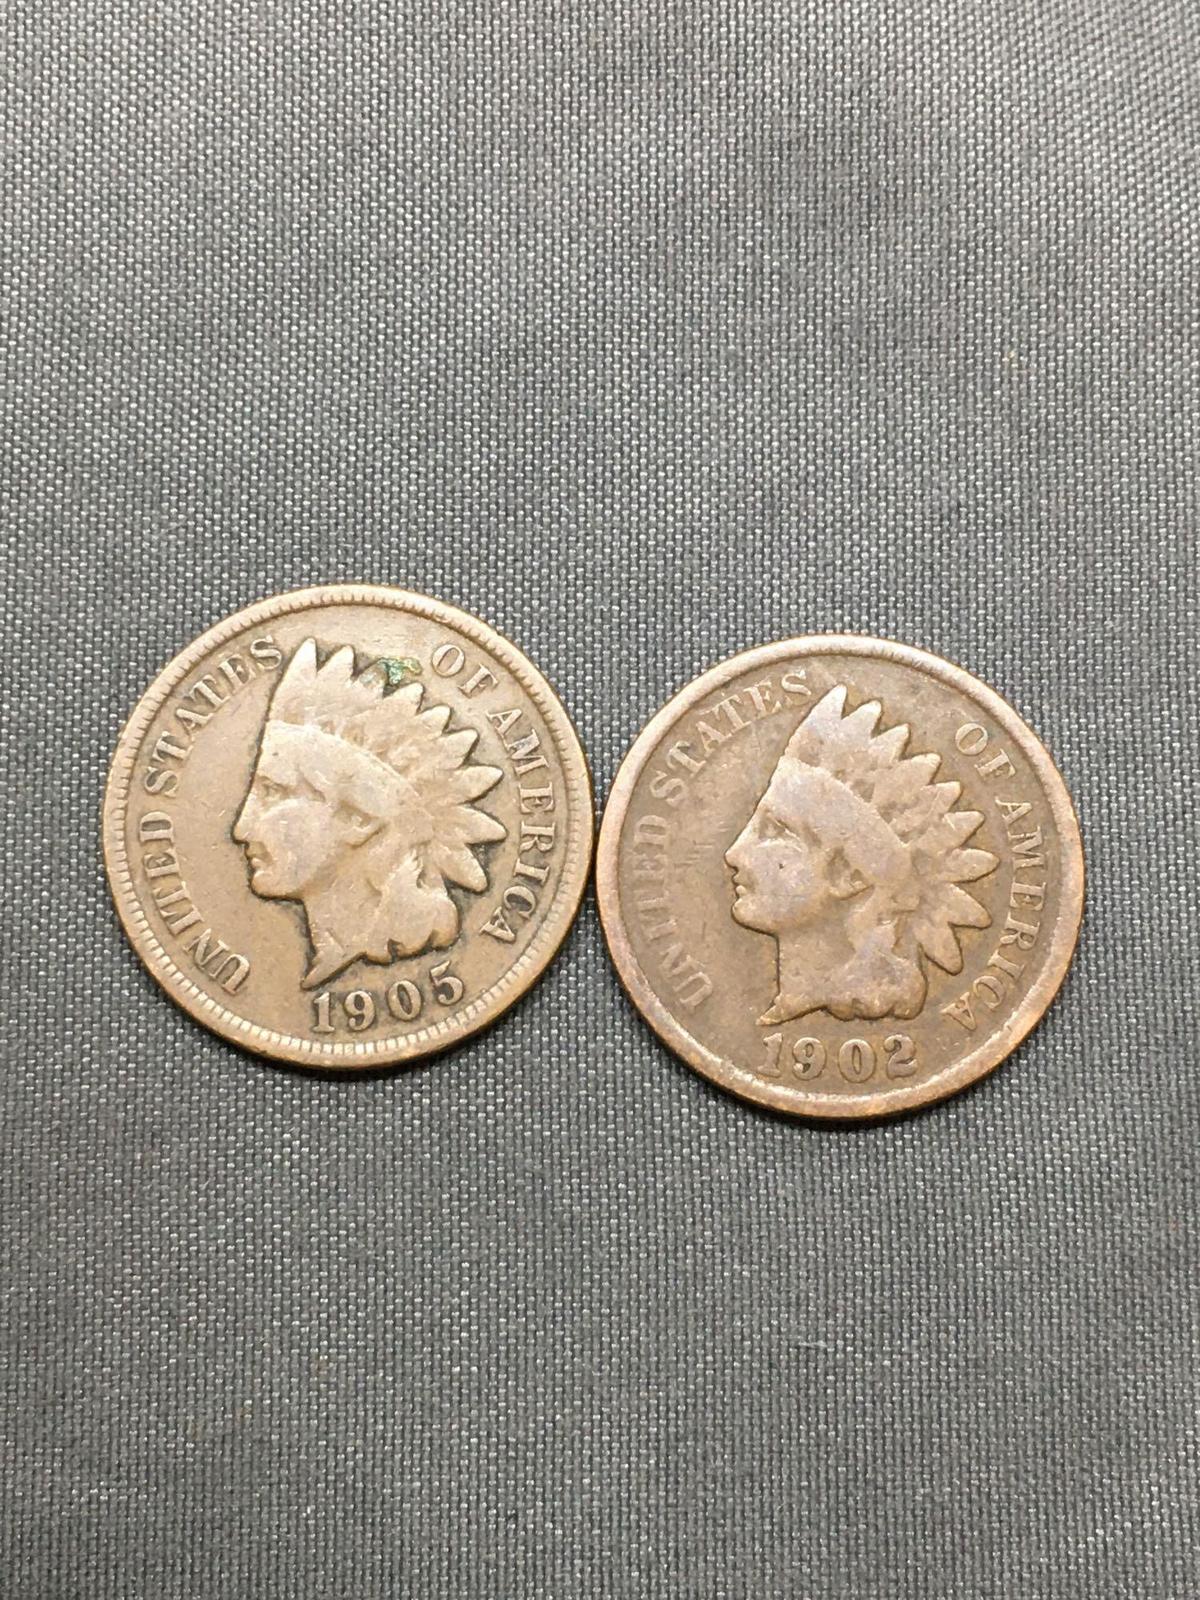 2 Count Lot of United States Indian Head Penny Cent Coins from Estate - 1902 & 1905